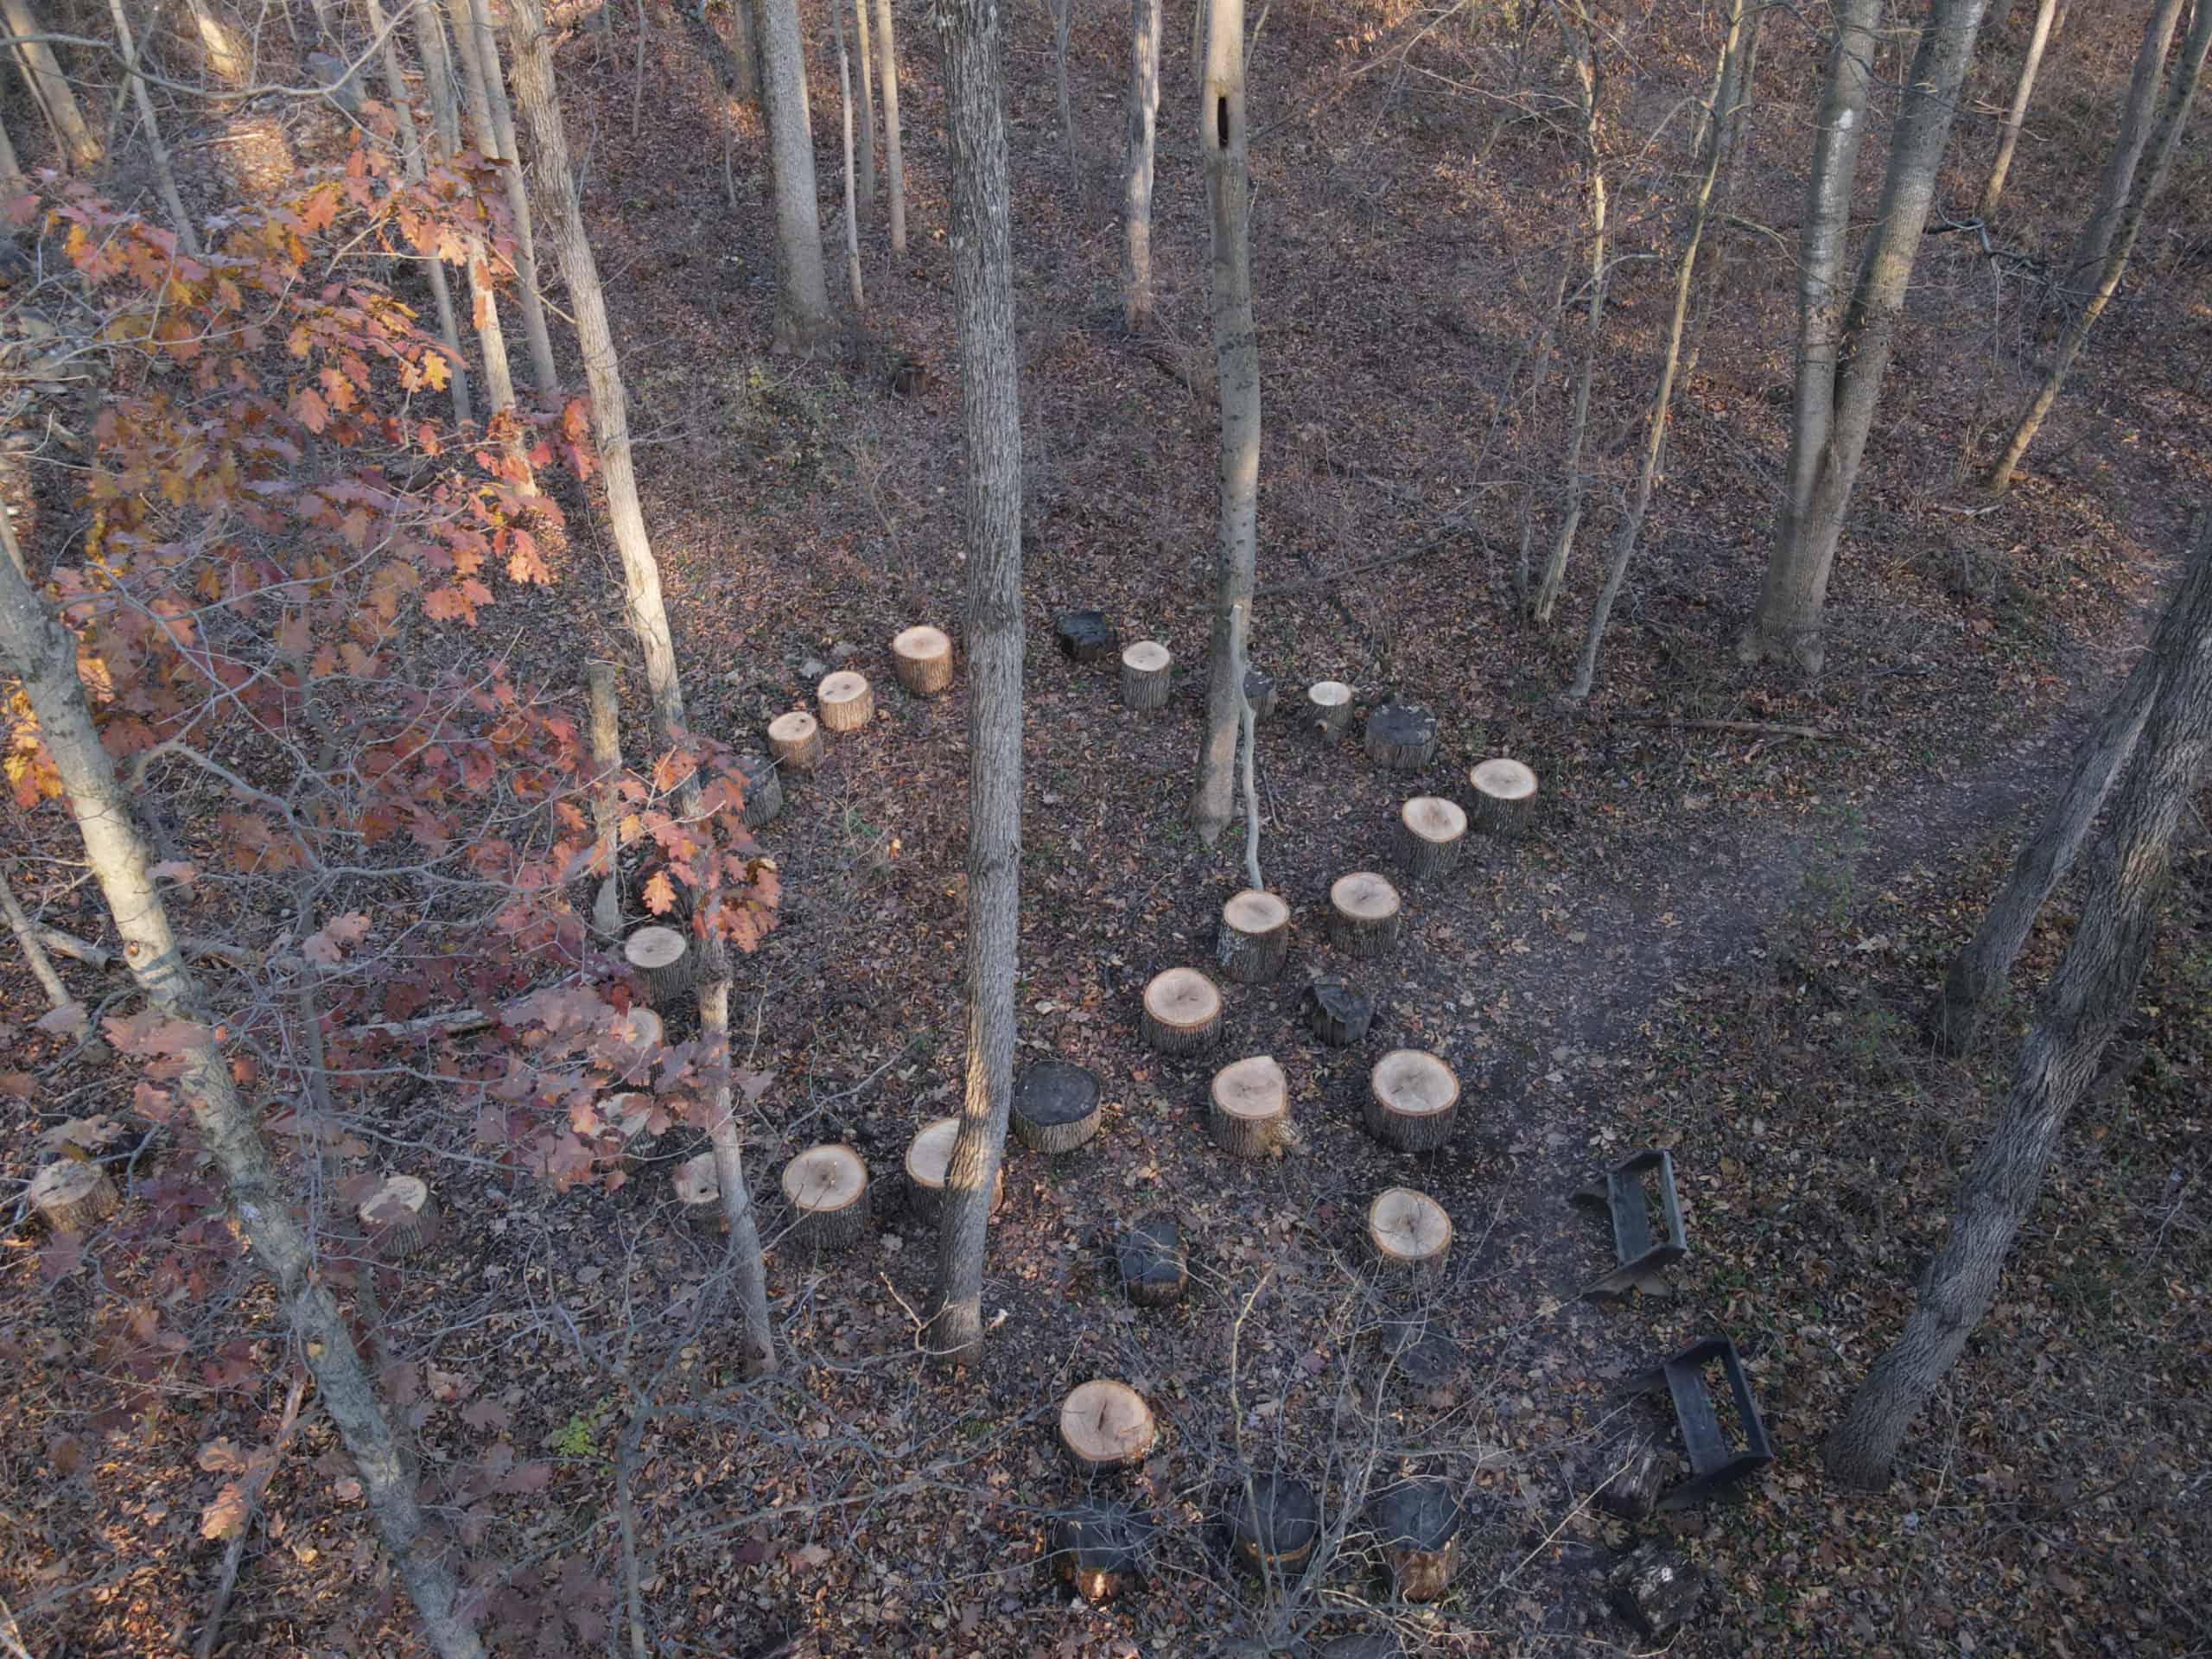 View looking down on log sections set up as a stump playground for kids in the woods